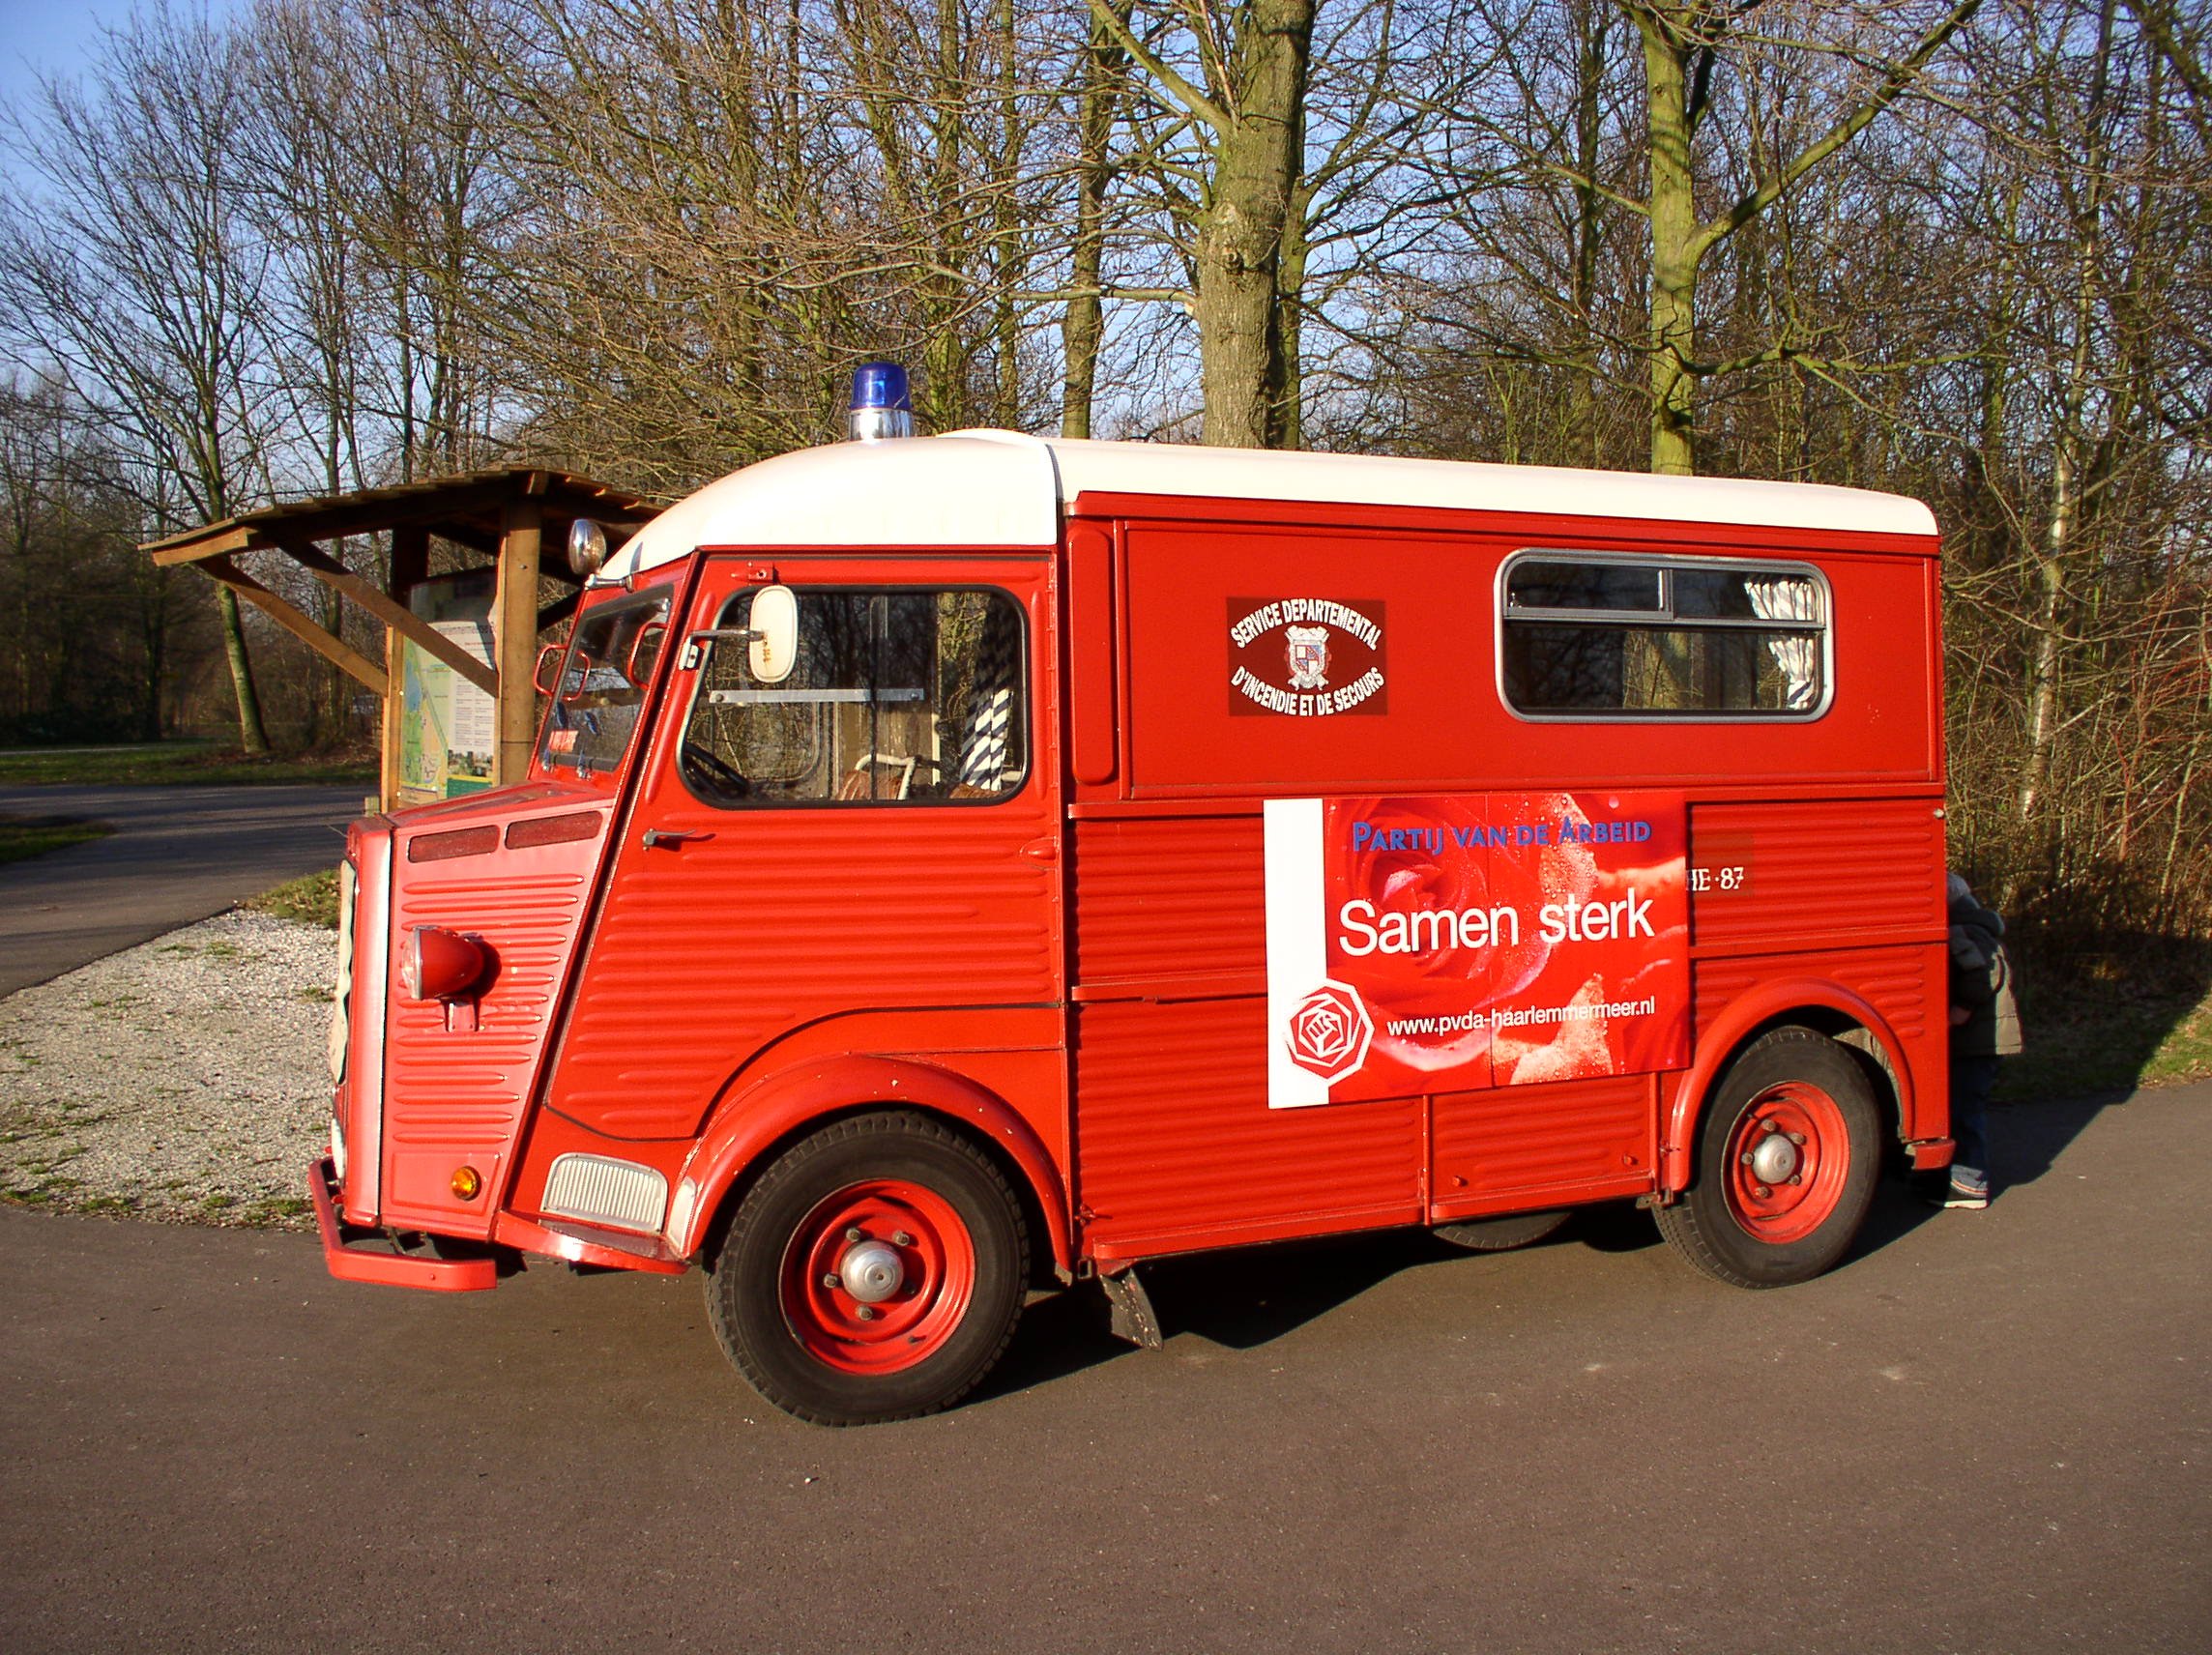 citroen, Type h, Classic, Cars, French, Fourgonnette, Truck, Van, Food, Delivery Wallpaper